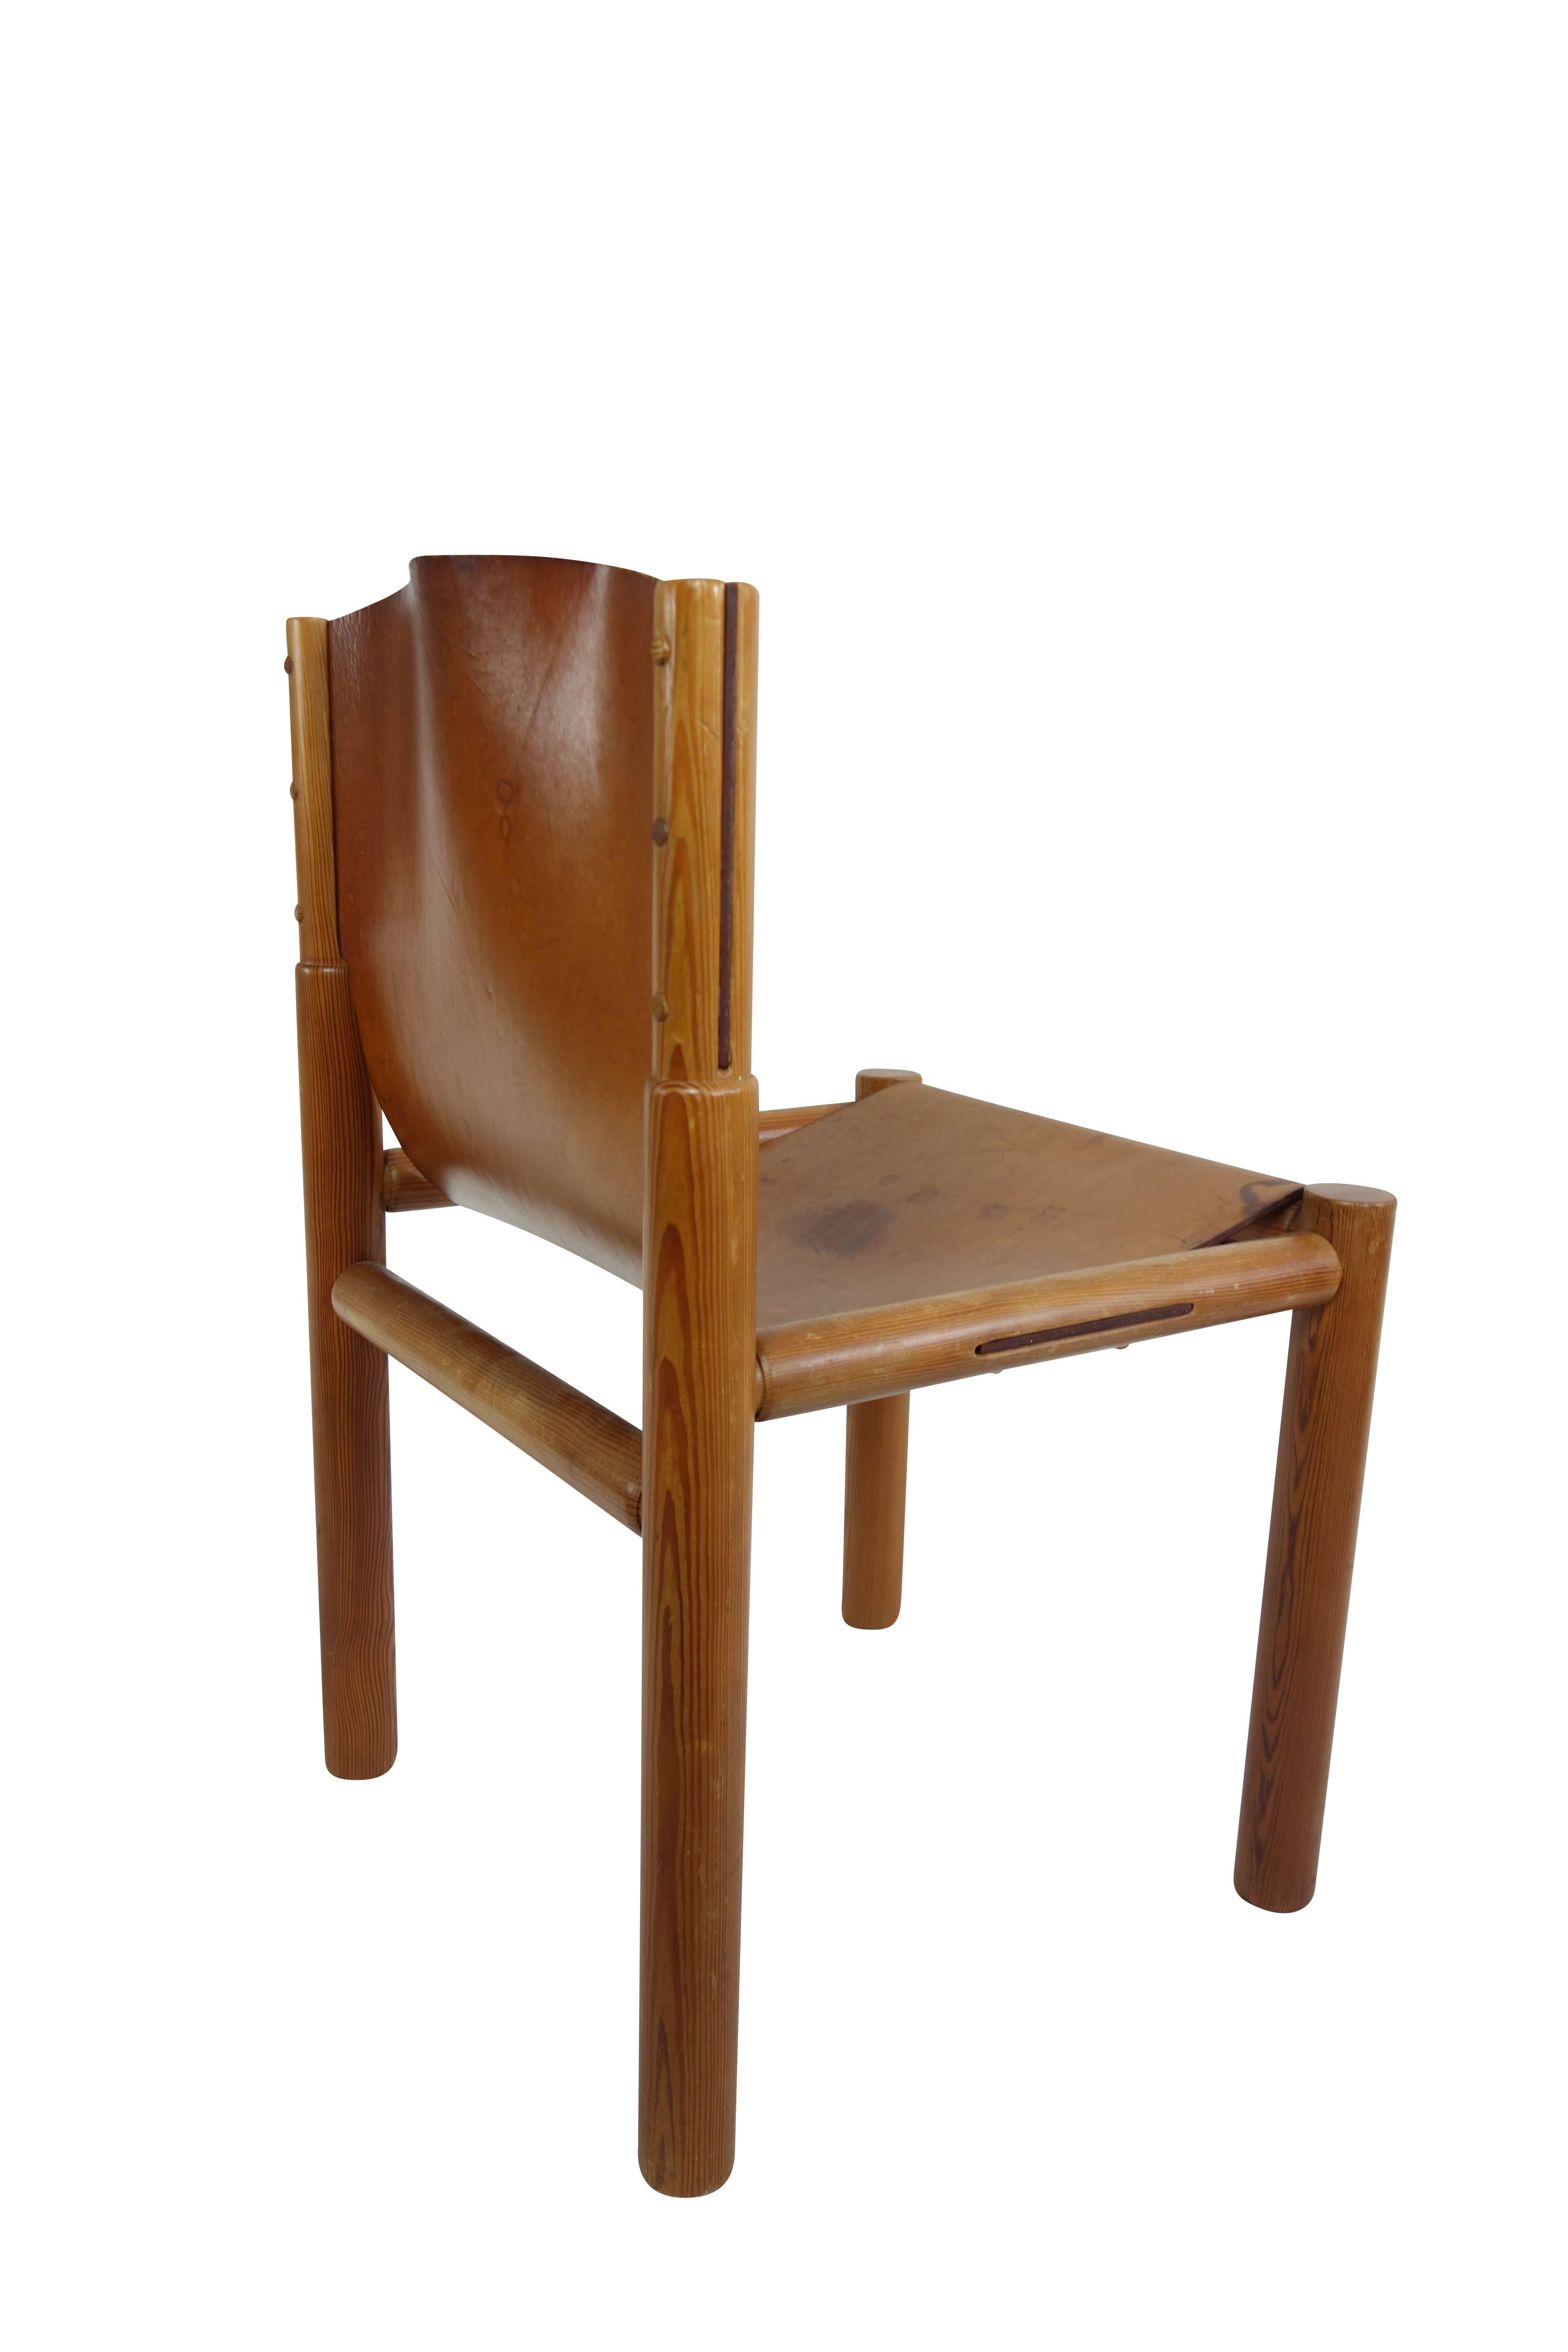 This is a beautiful set of Midcentury French leather sling seat dining chairs. 